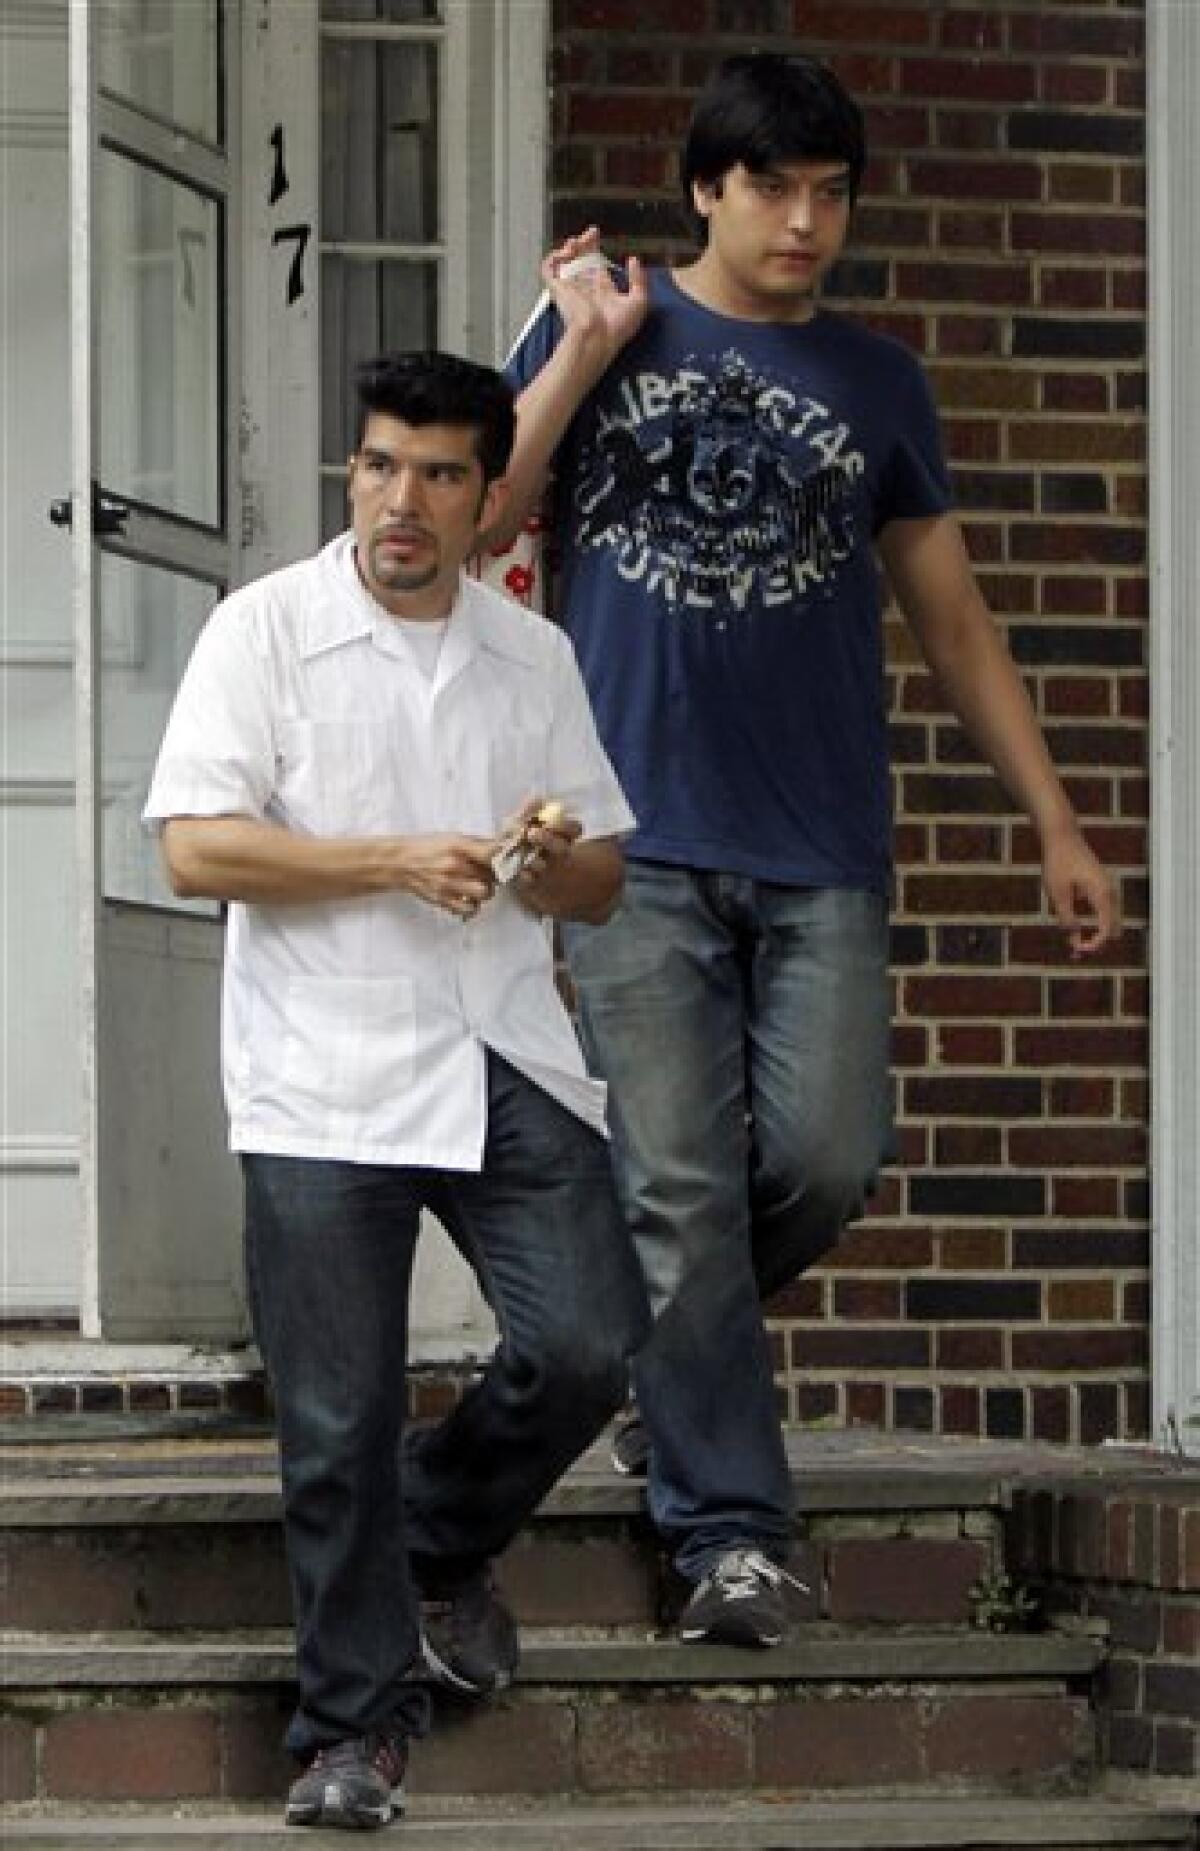 Waldo Mariscal, left, and his half-brother Juan Lazaro Jr., sons of accused spy Vicky Pelaez, leave their home in Yonkers, N.Y., Friday, July 9, 2010. Lazaro Jr., 17, is a gifted pianist who has lived his whole life in the U.S., although he has spent considerable time in Peru, where his mother was born. Mariscal is an architect. (AP Photo/Seth Wenig)